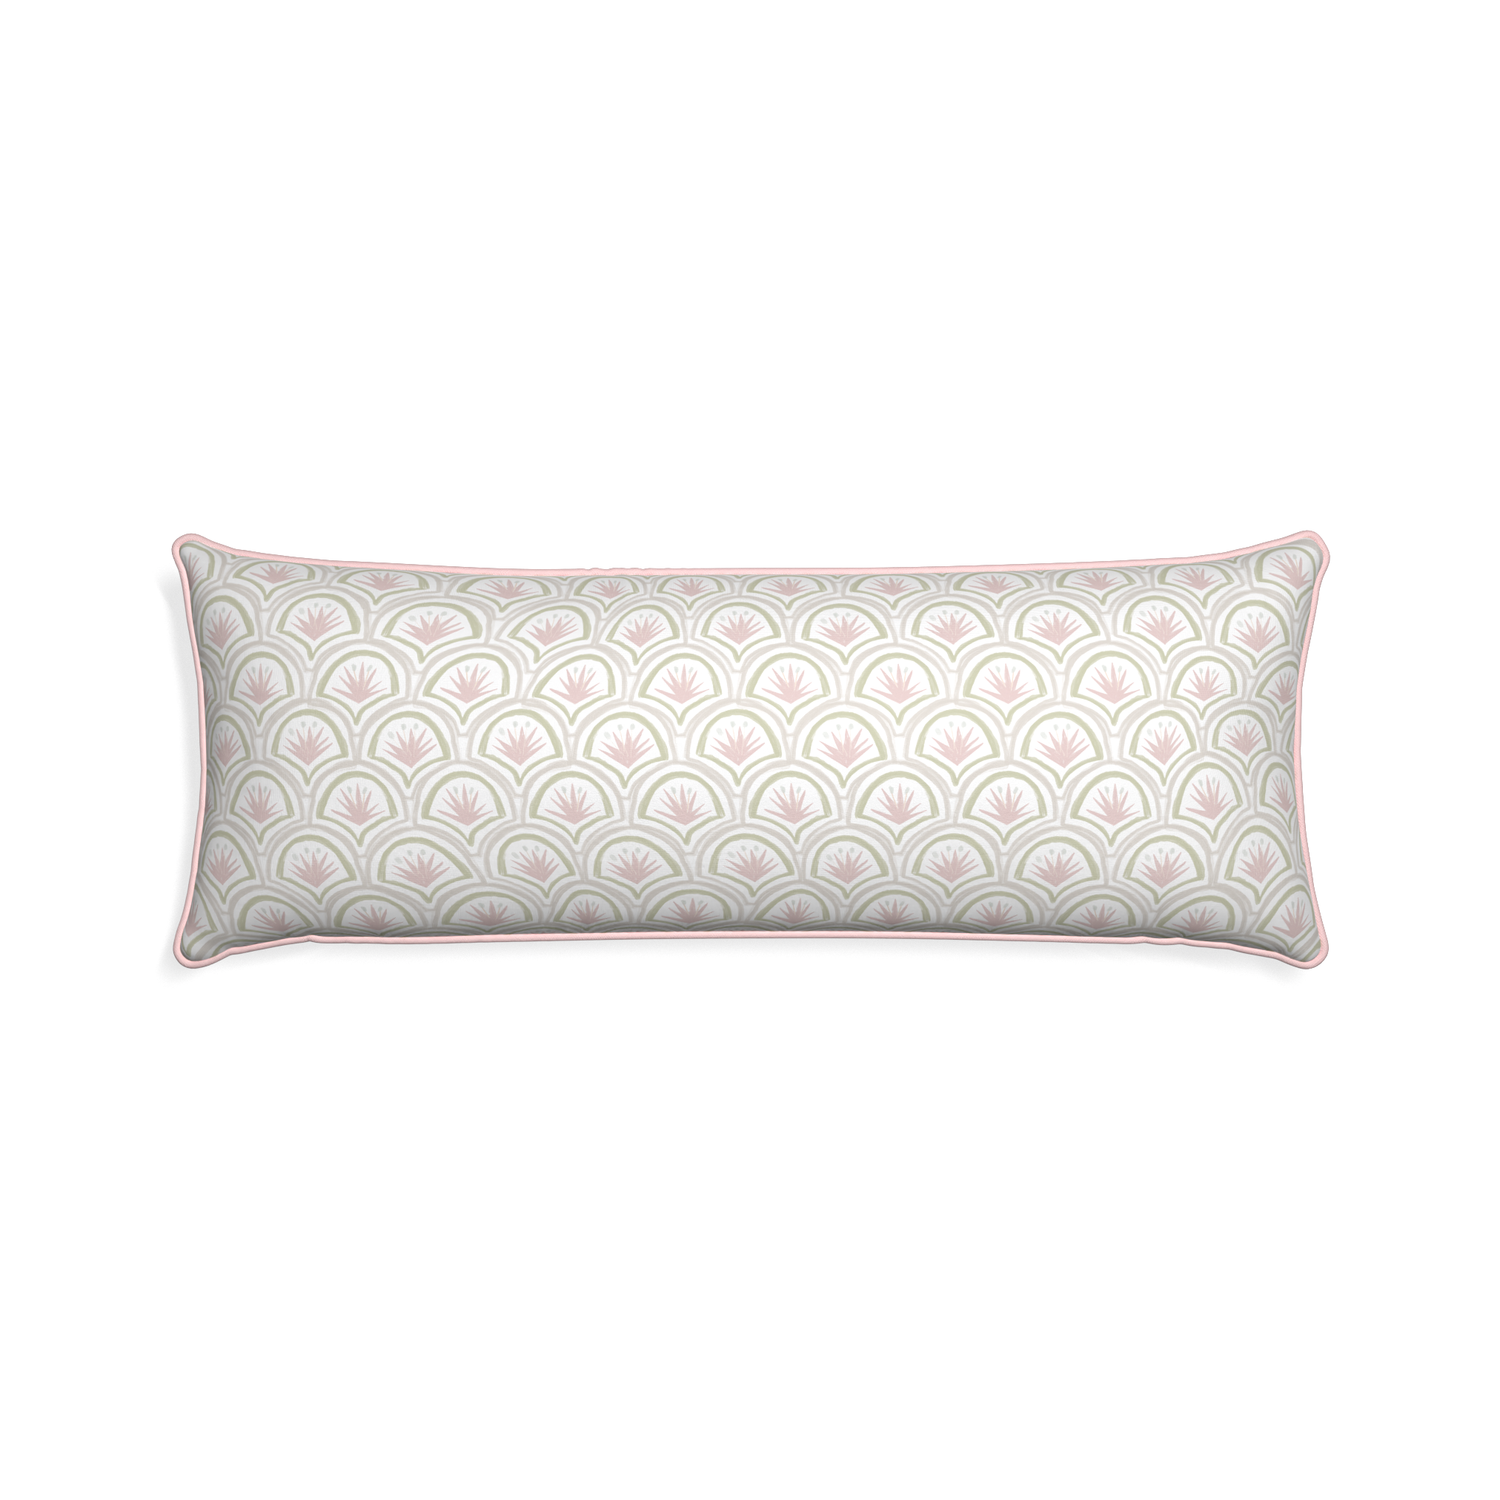 Xl-lumbar thatcher rose custom pillow with petal piping on white background